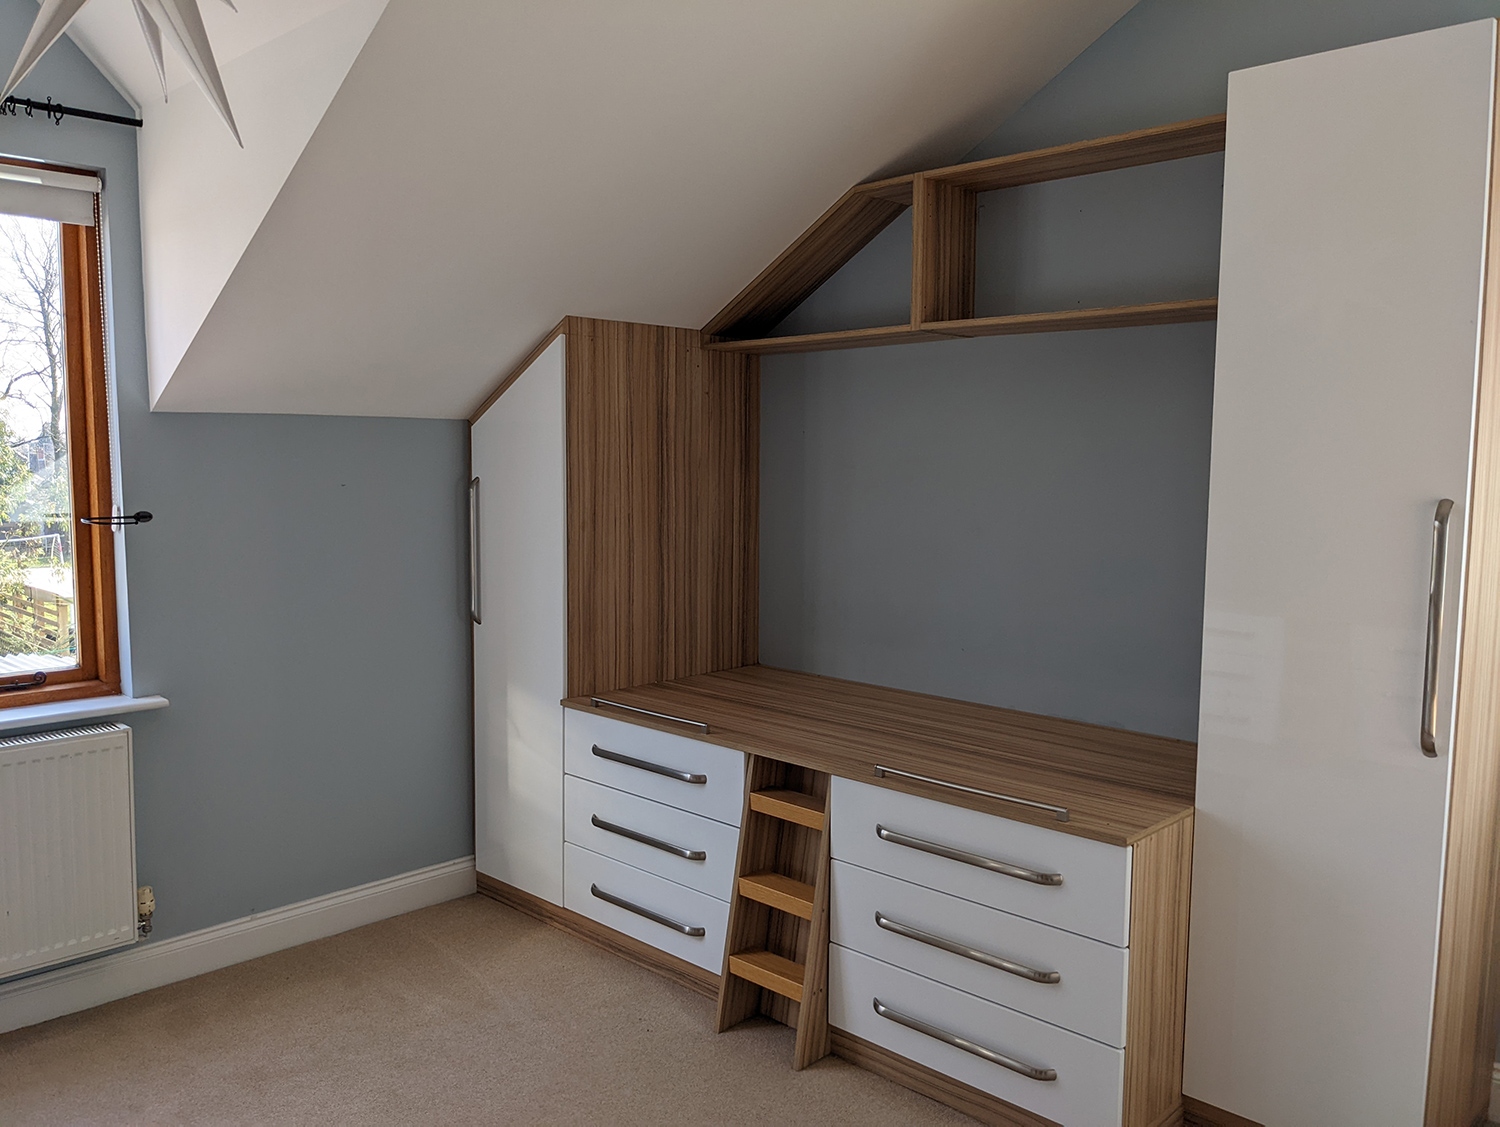 A before photo of some of the fitted furniture in the kid's bedroom